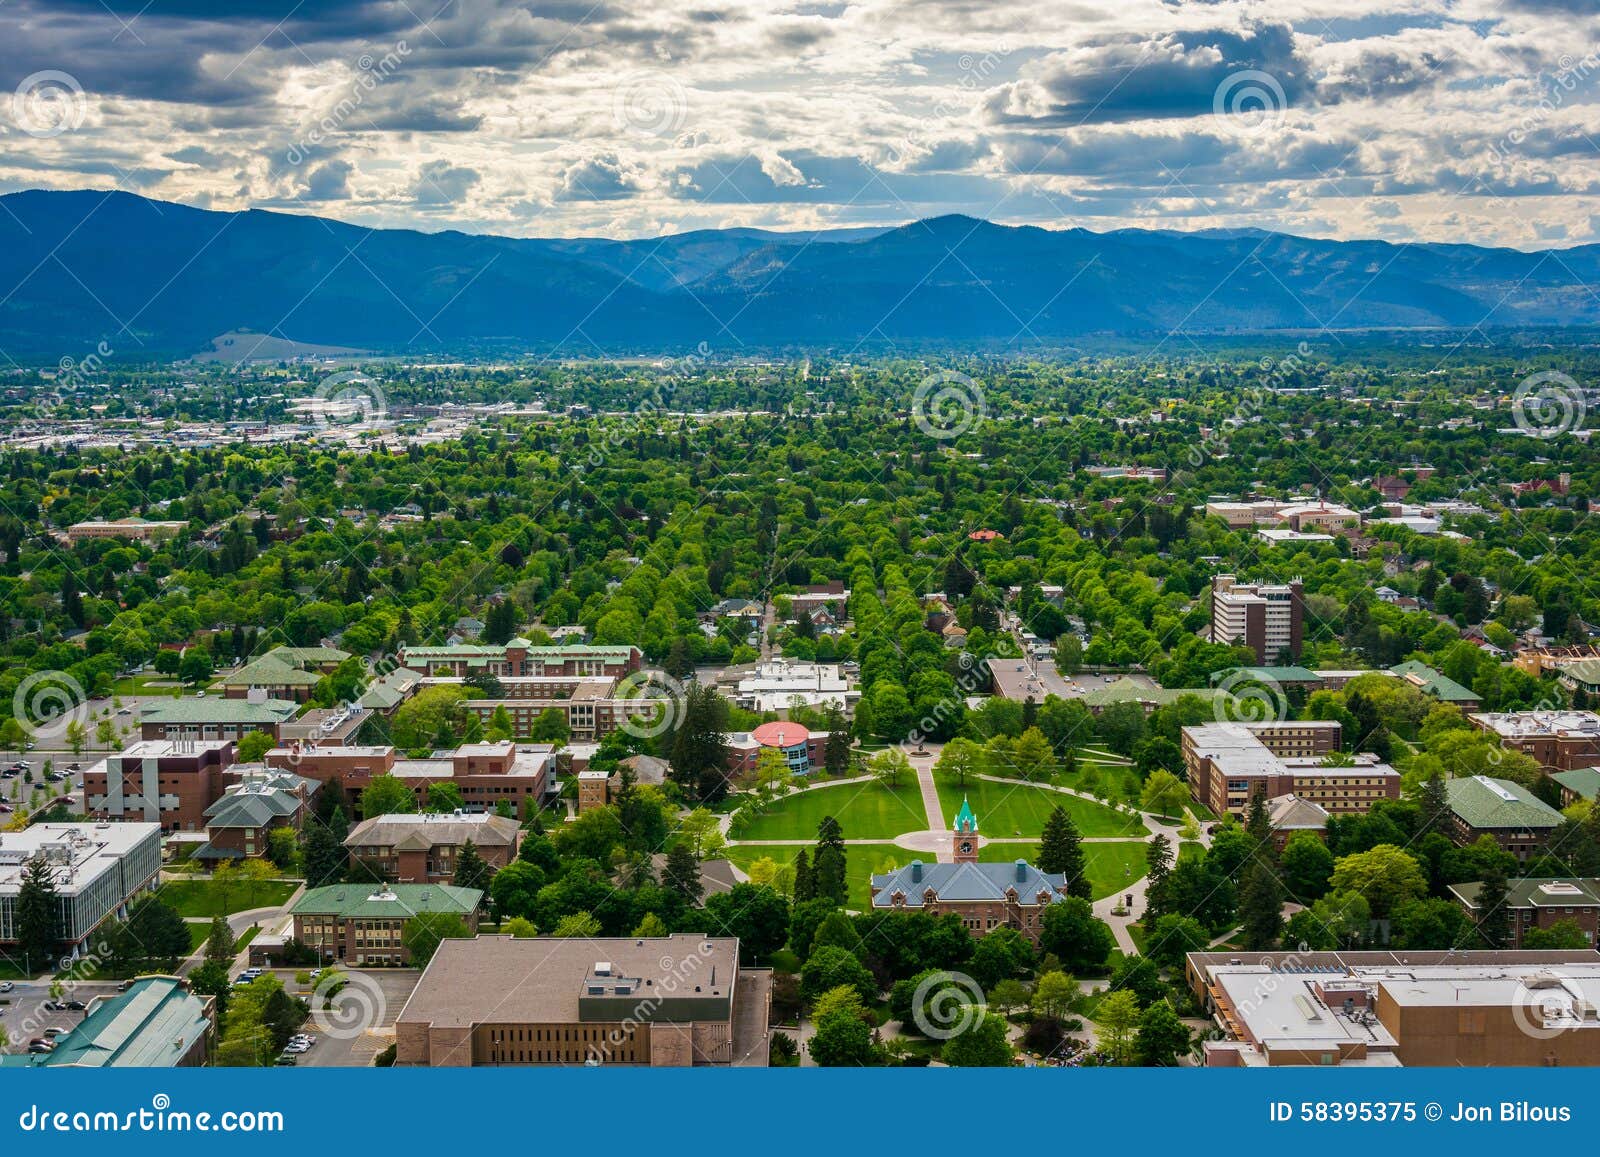 view of university of montana from mount sentinel, in missoula,